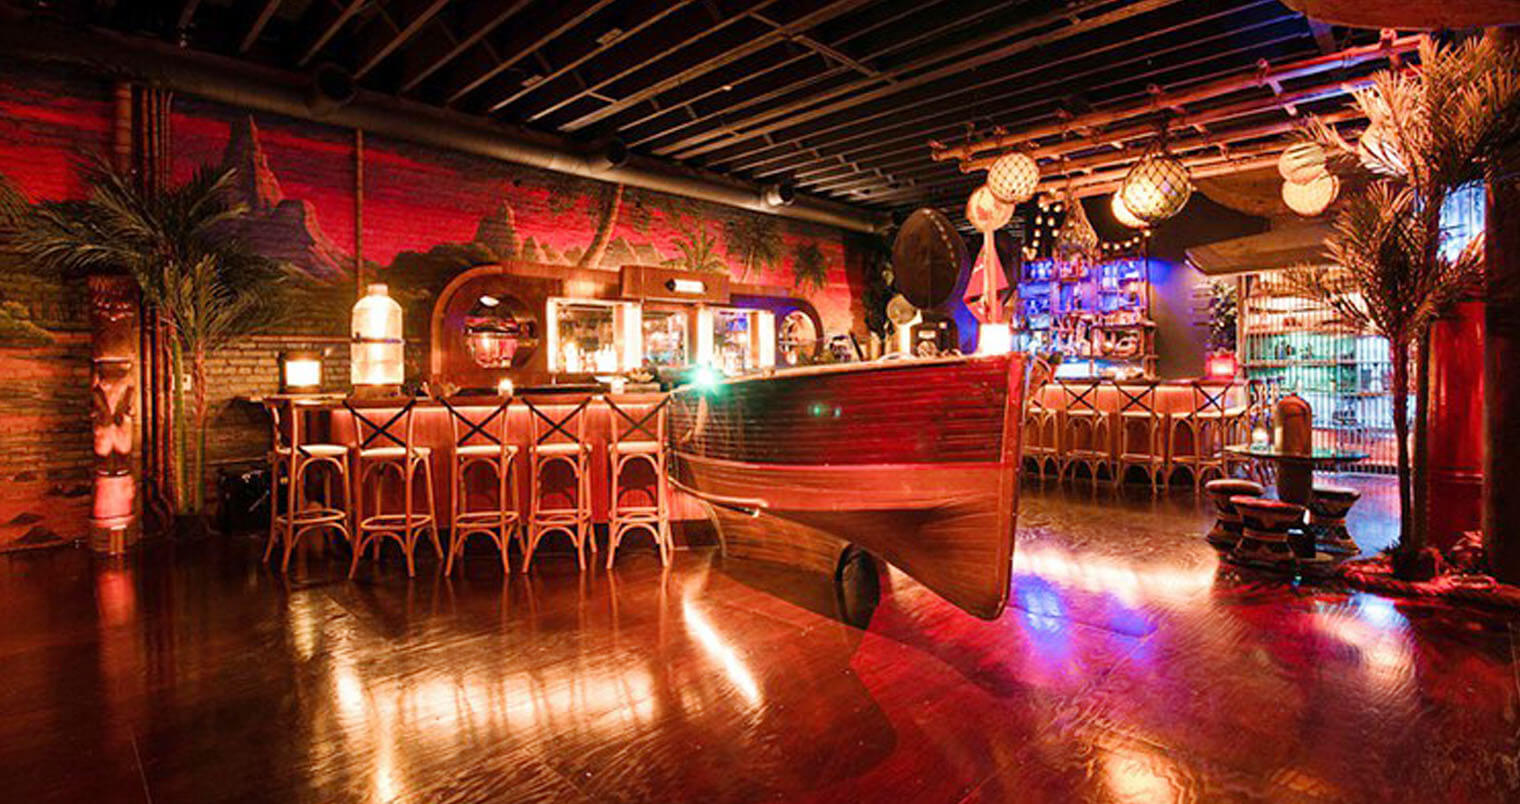 The Pacific Seas Bar with Boat featured image